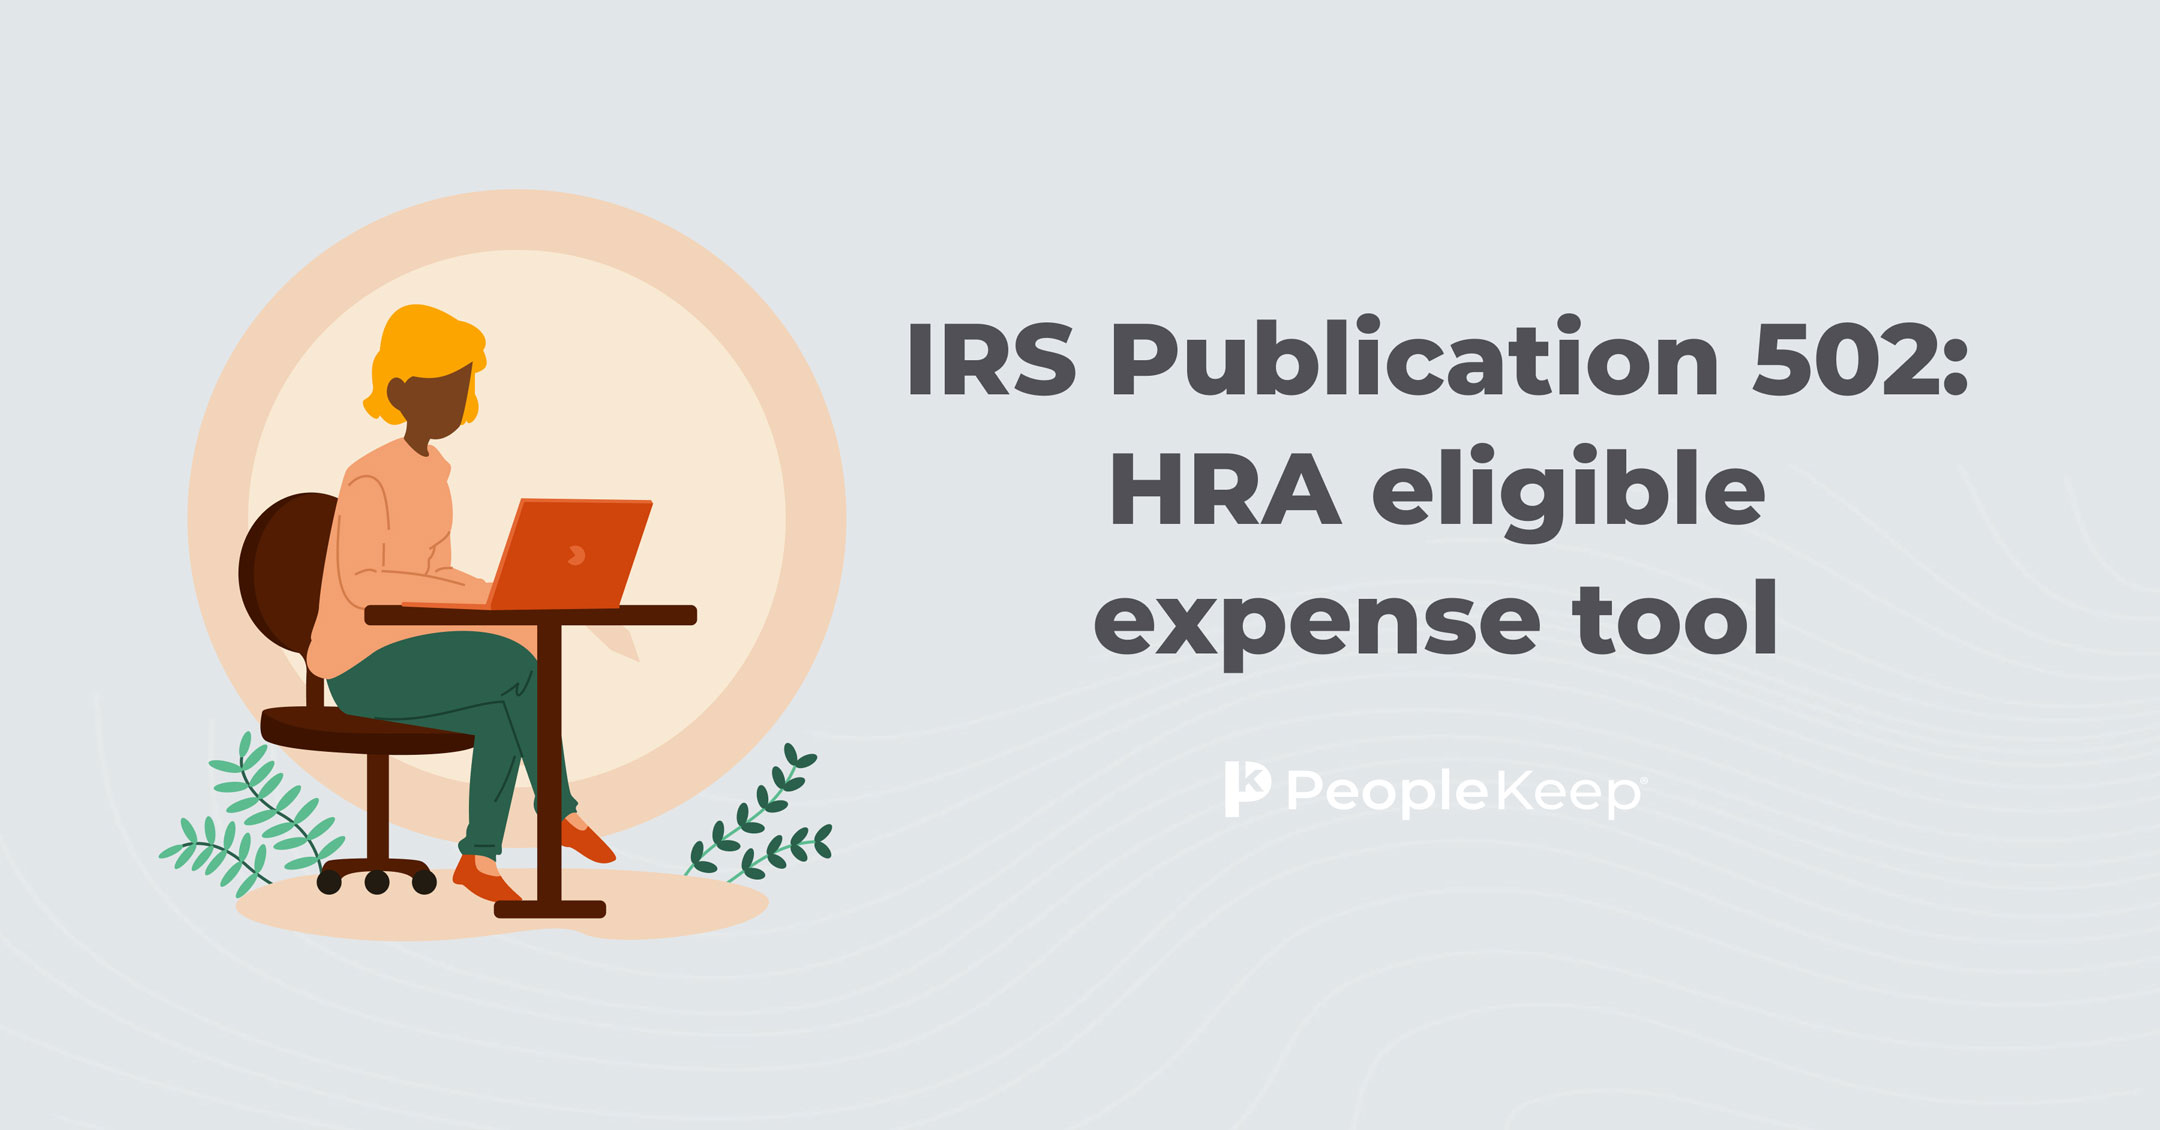 IRS 502: eligible expense tool for small business HRAs